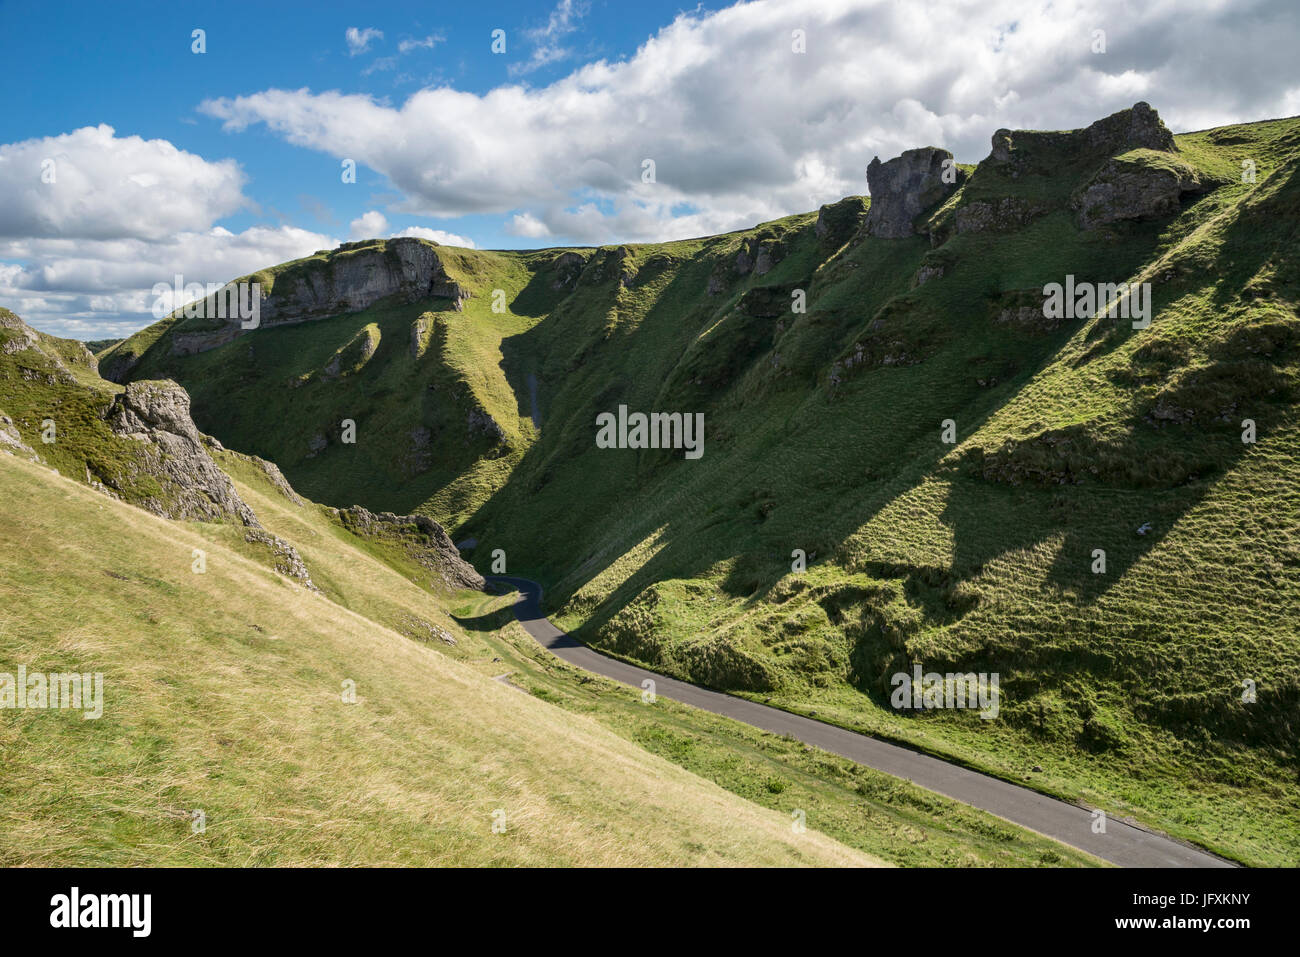 Winnats Pass, an area of dramatic limestone sceenry at Castleton in the Peak District, Derbyshire, England. Stock Photo